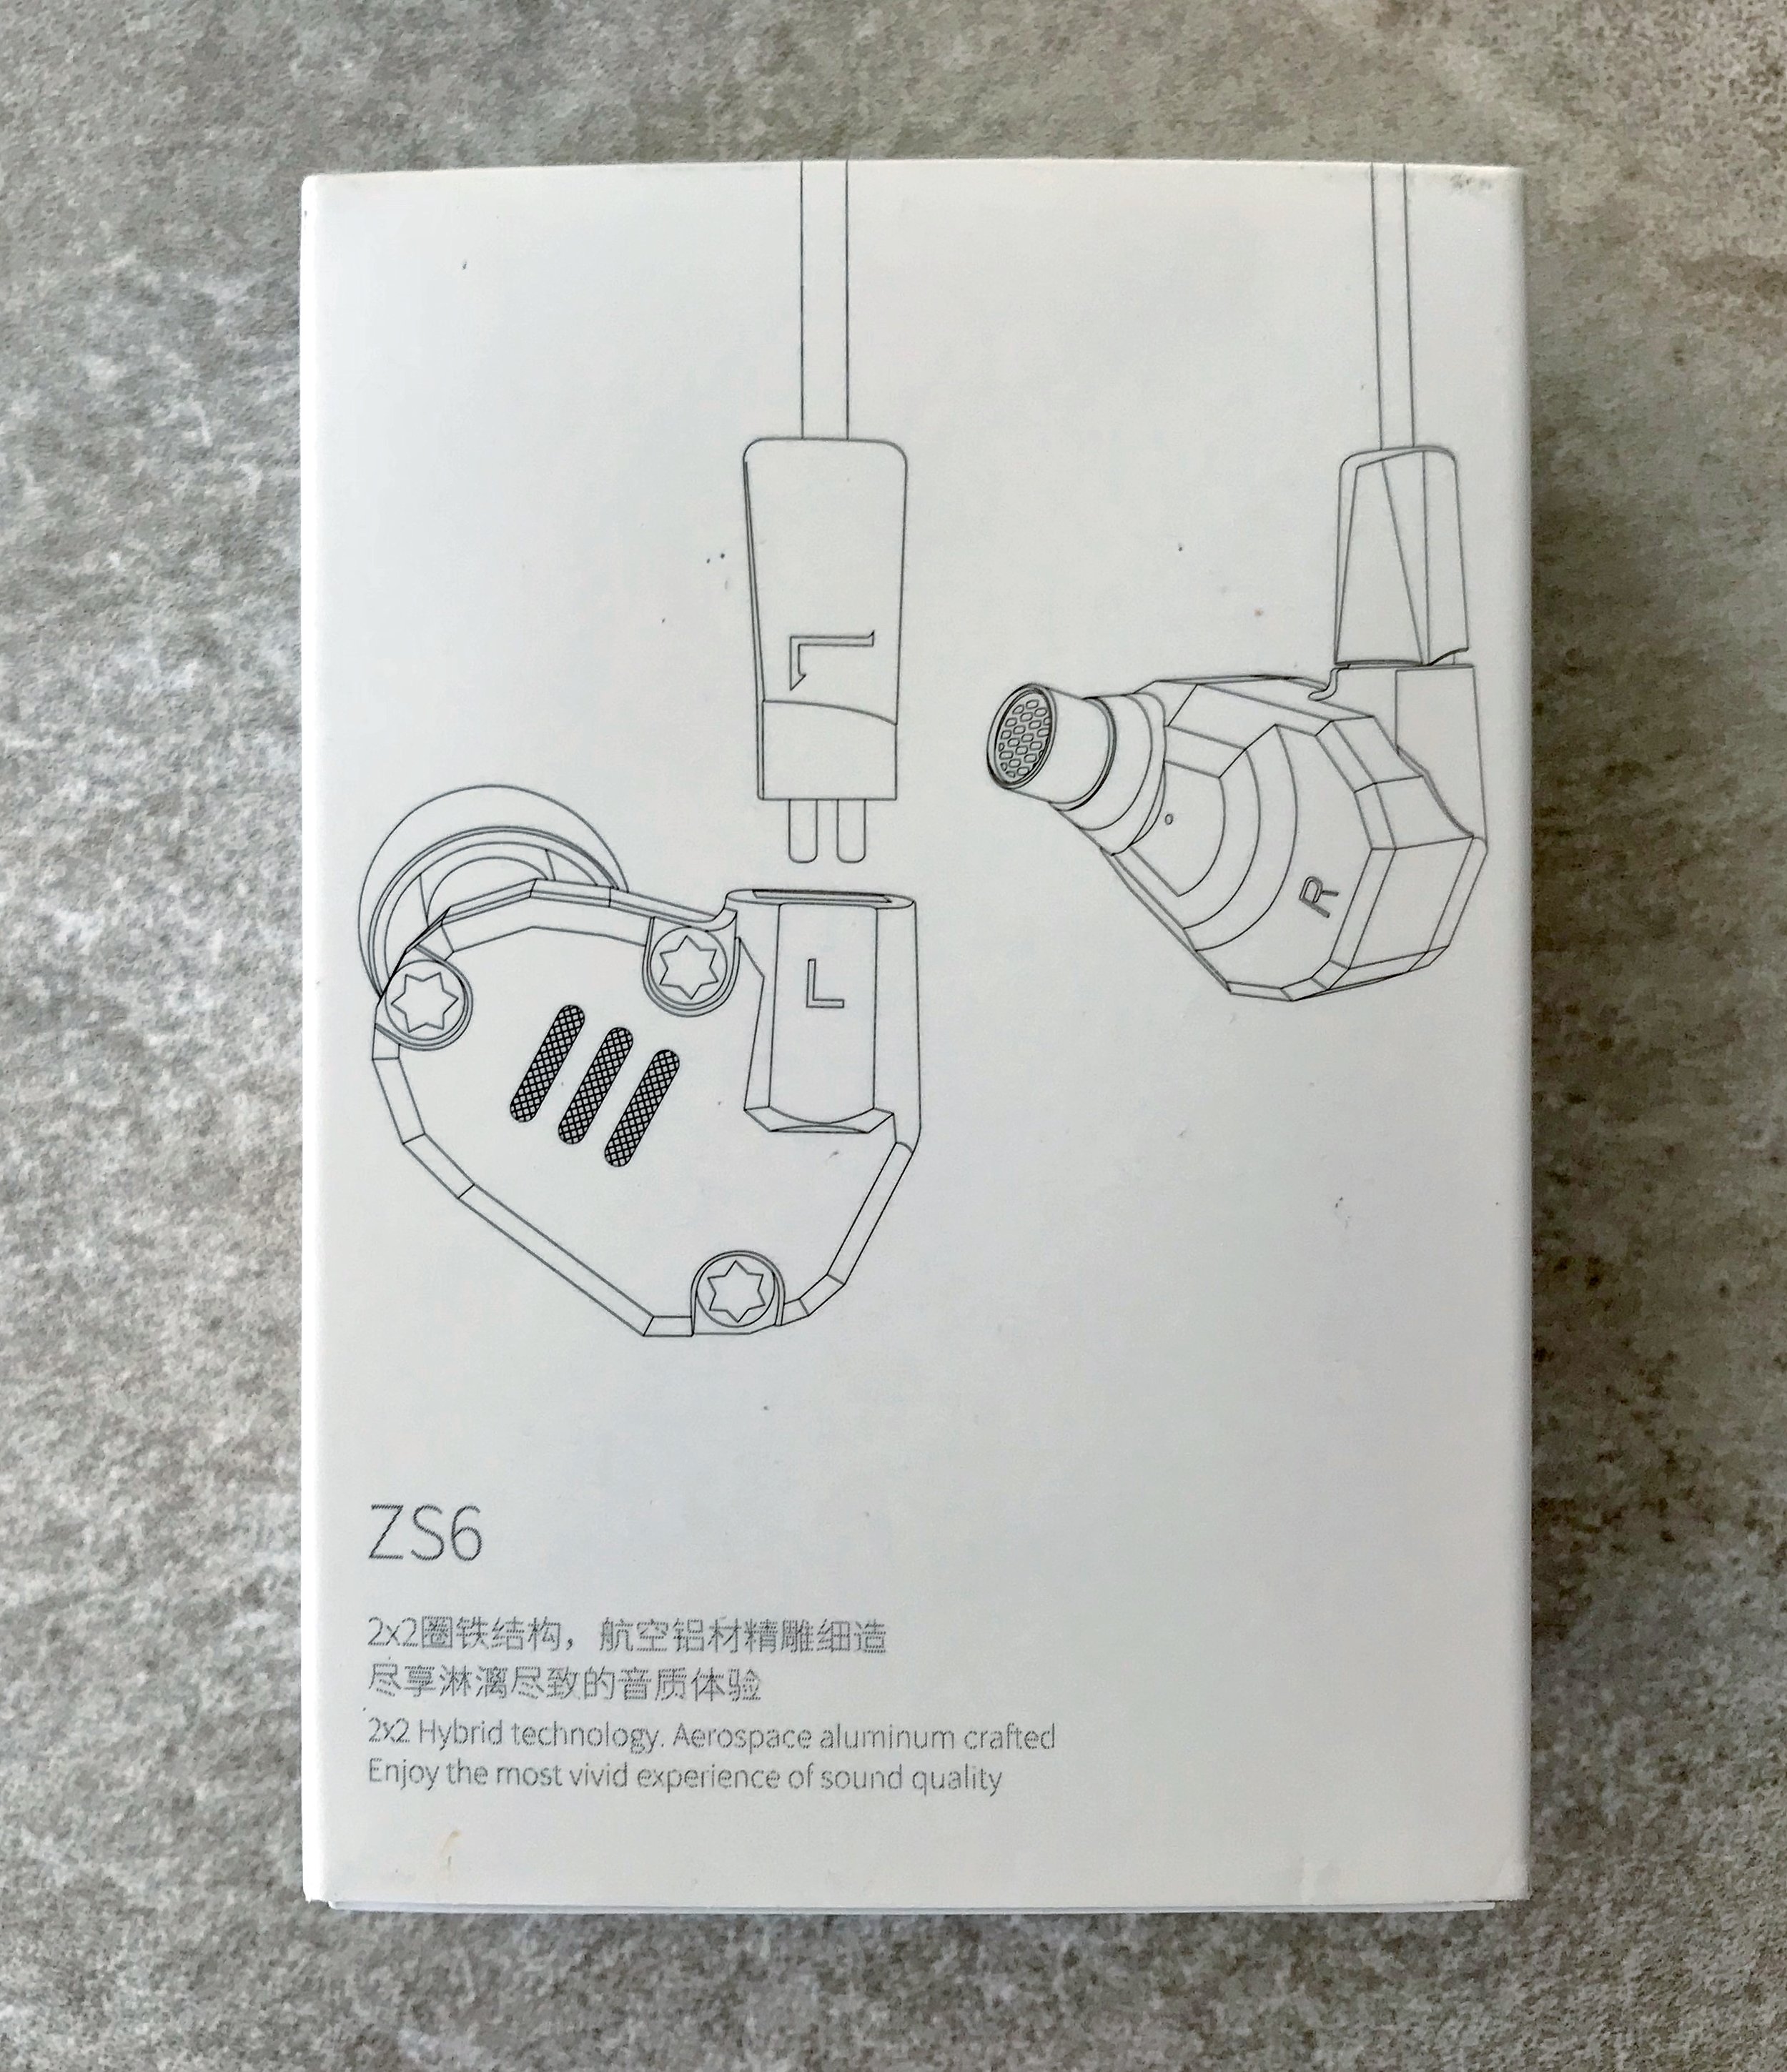 Kz Zs6 Earphones By Knowledge Zenith Review Audiophile On